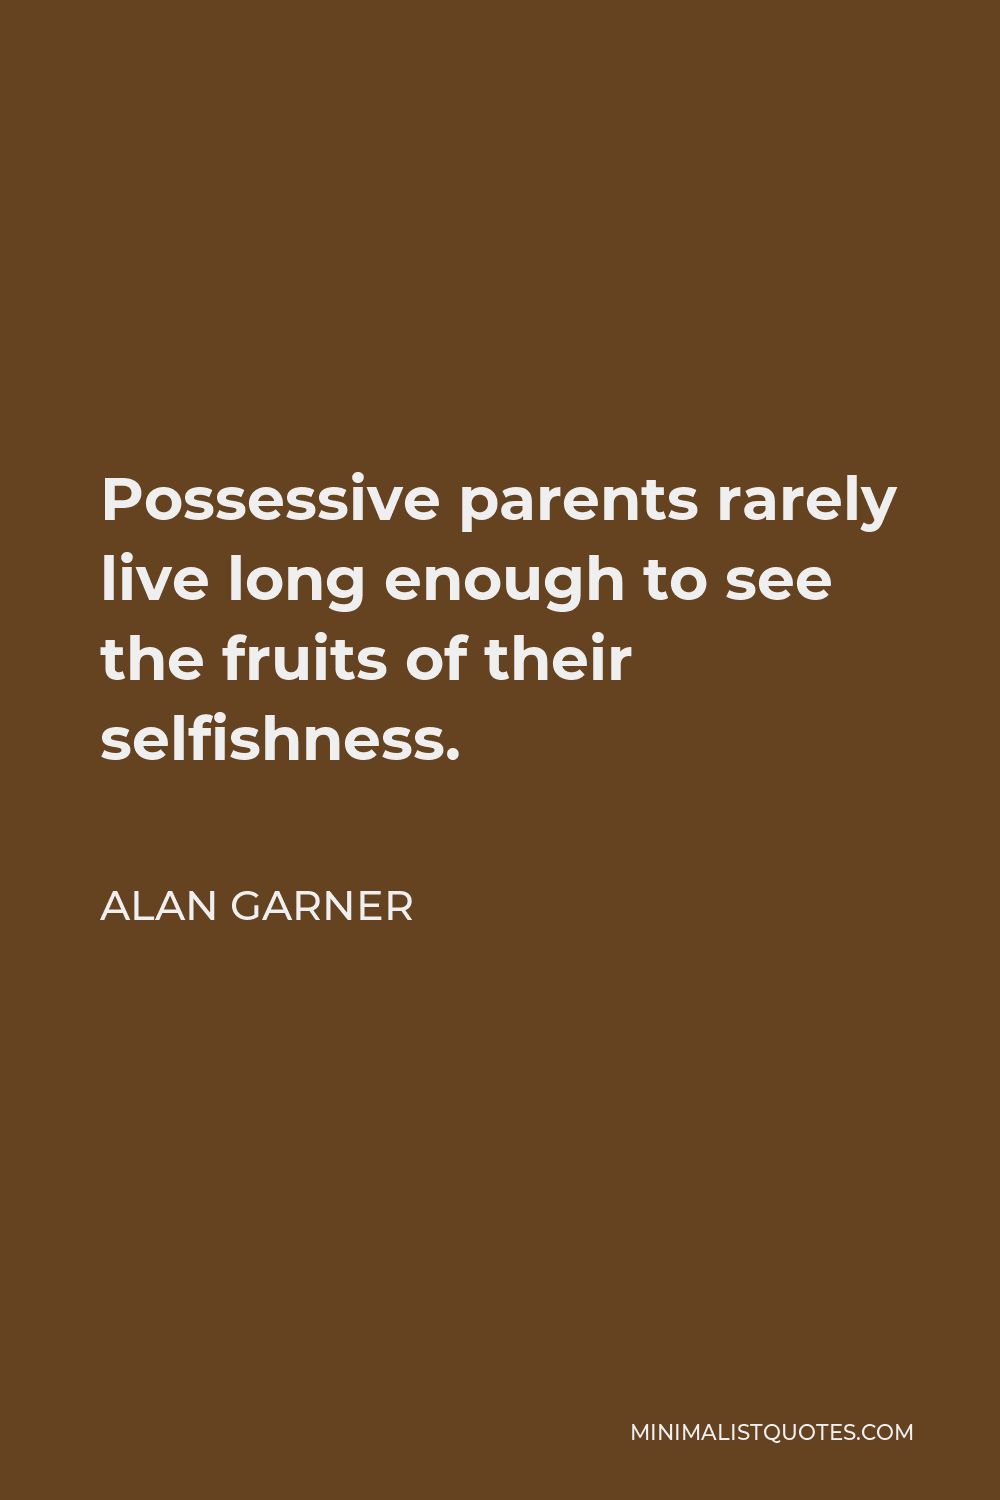 Alan Garner Quote - Possessive parents rarely live long enough to see the fruits of their selfishness.